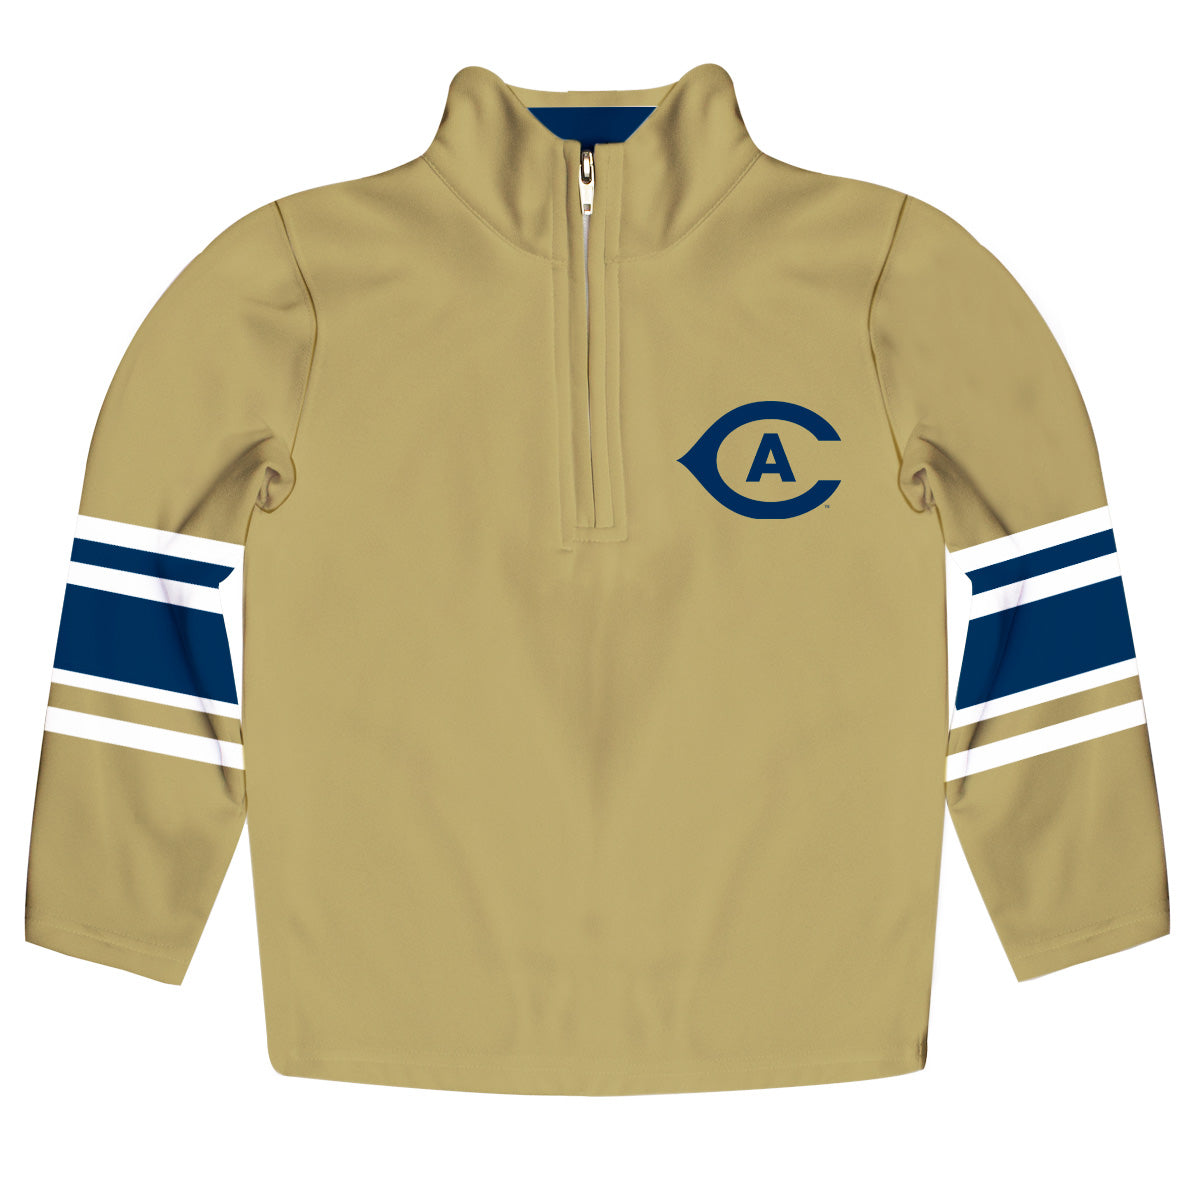 UC Davis Aggies Game Day Gold Quarter Zip Pullover for Infants Toddlers by Vive La Fete